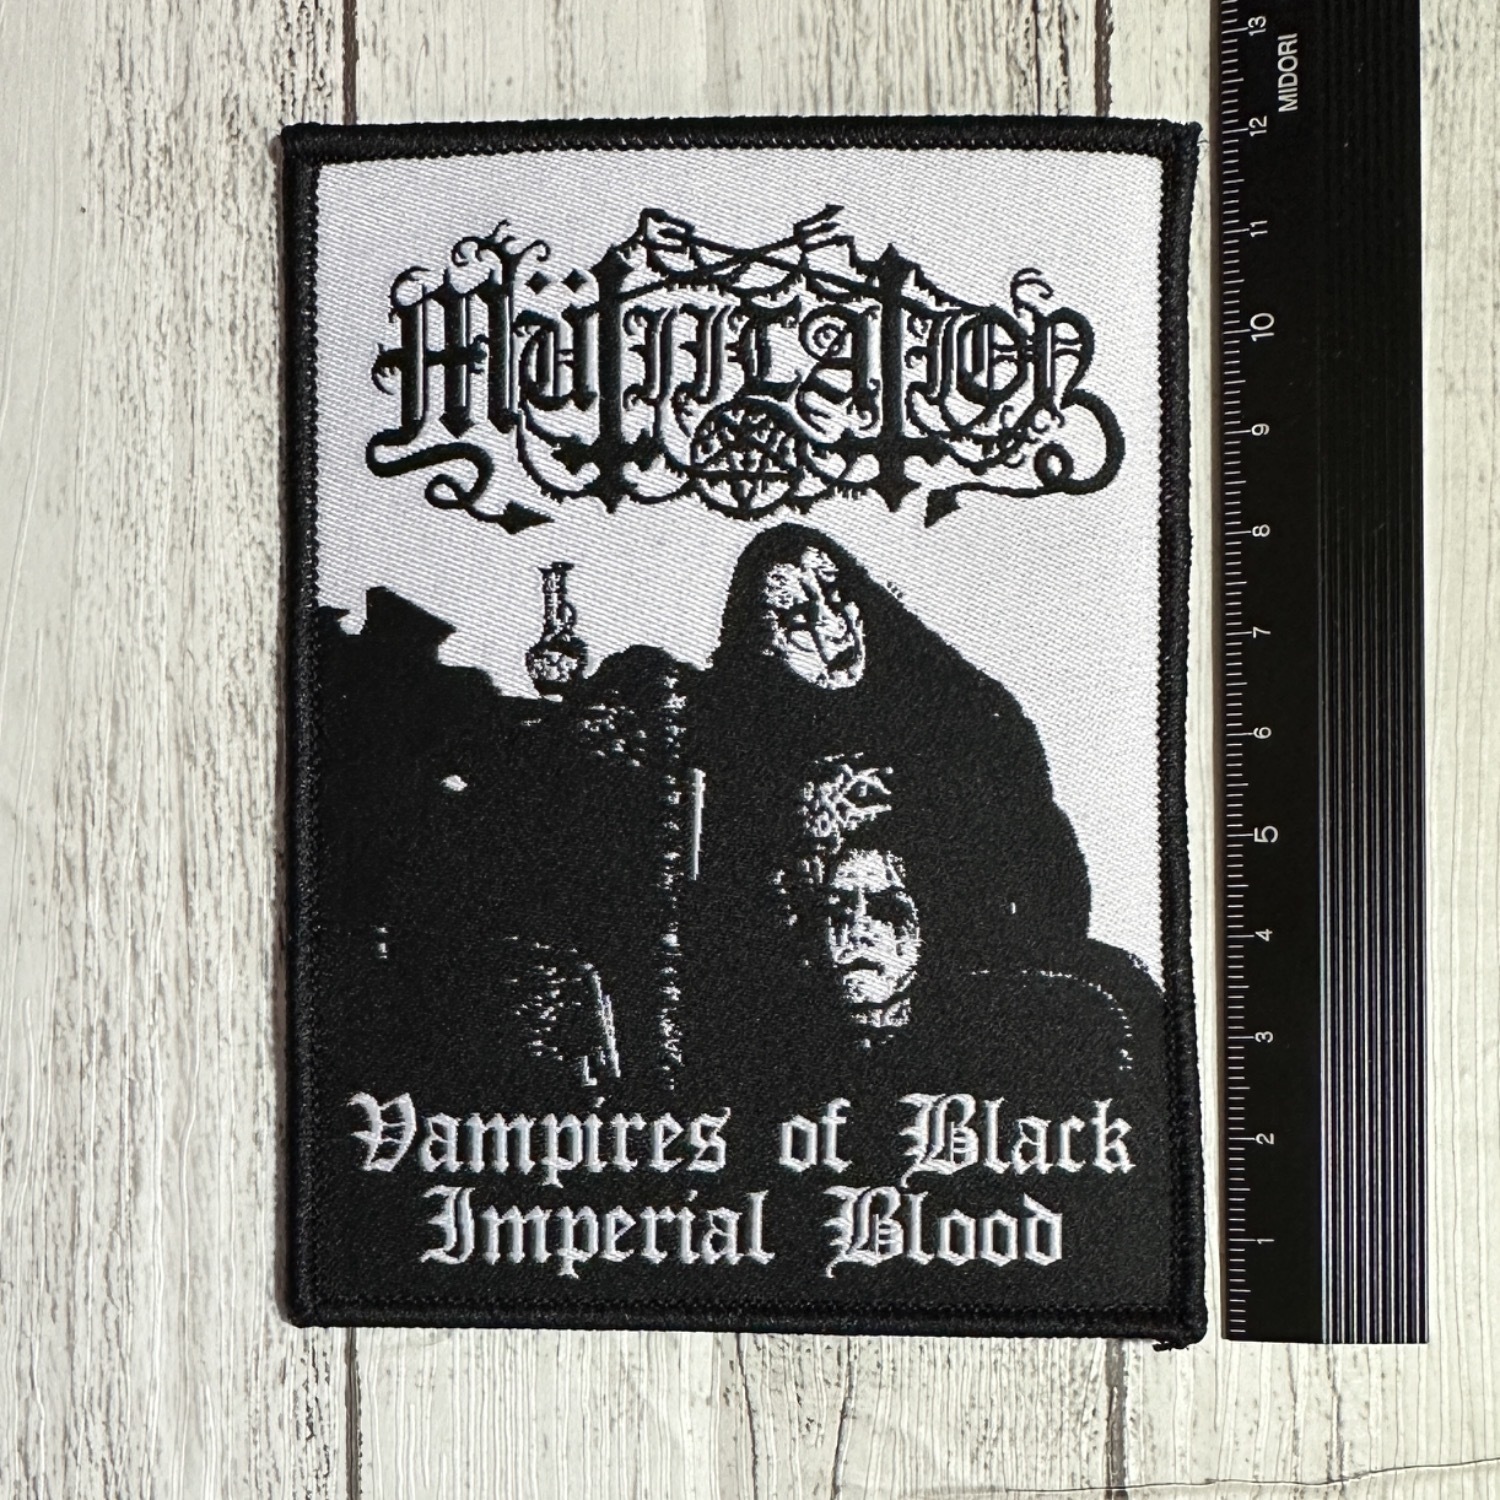 【Patch】 Mutiilation - Vampires of Black Imperial Blood 【Small Patch】